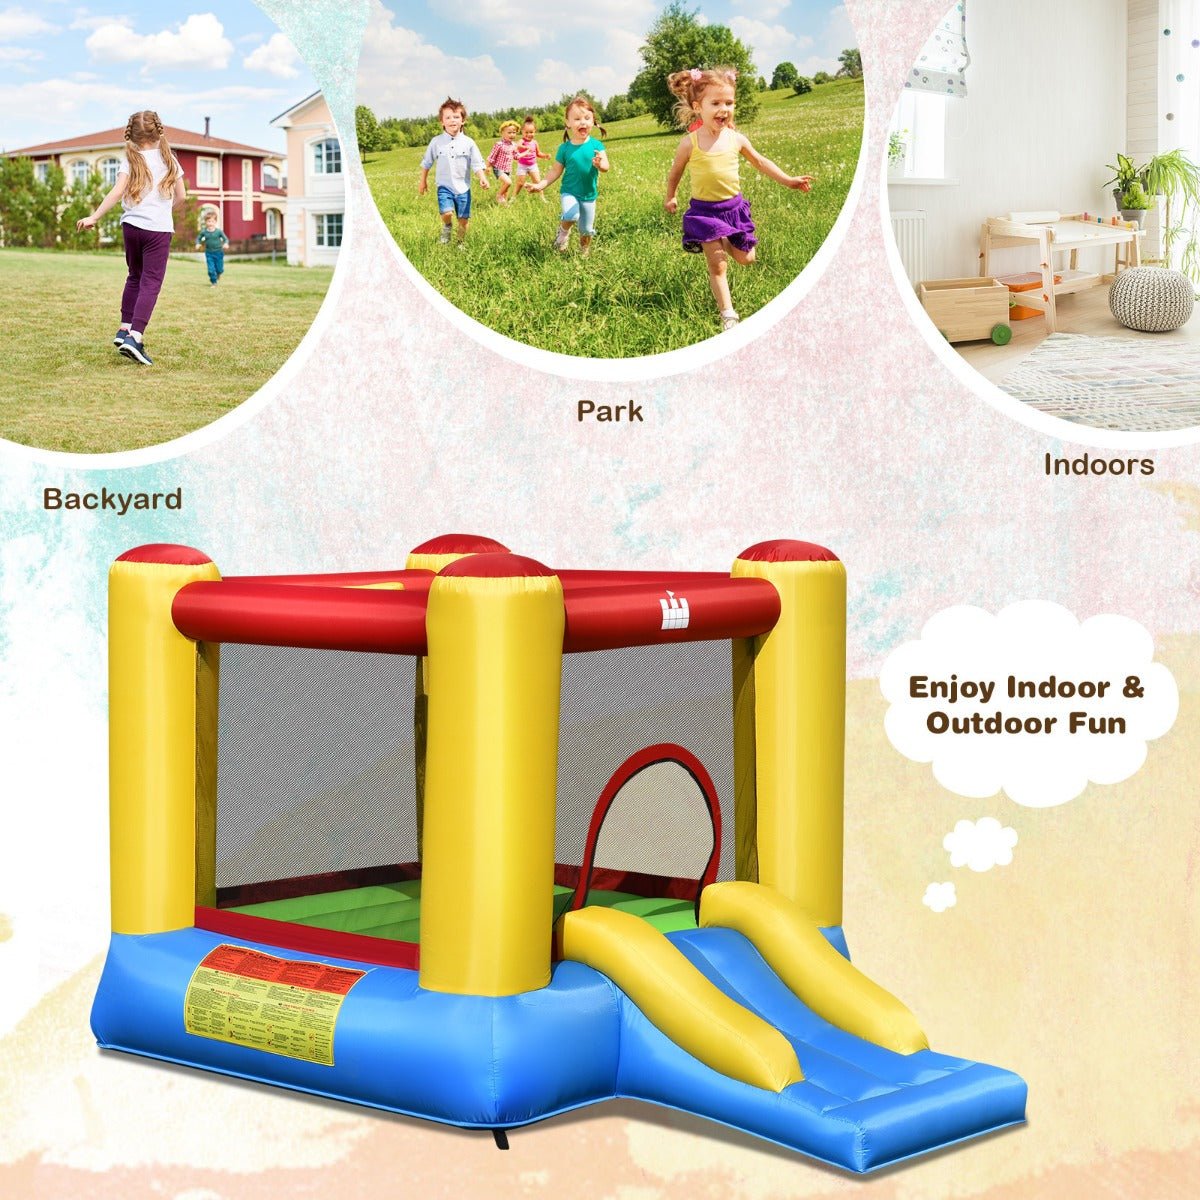 Energetic Adventures: Inflatable Bounce House Slide for Little Ones